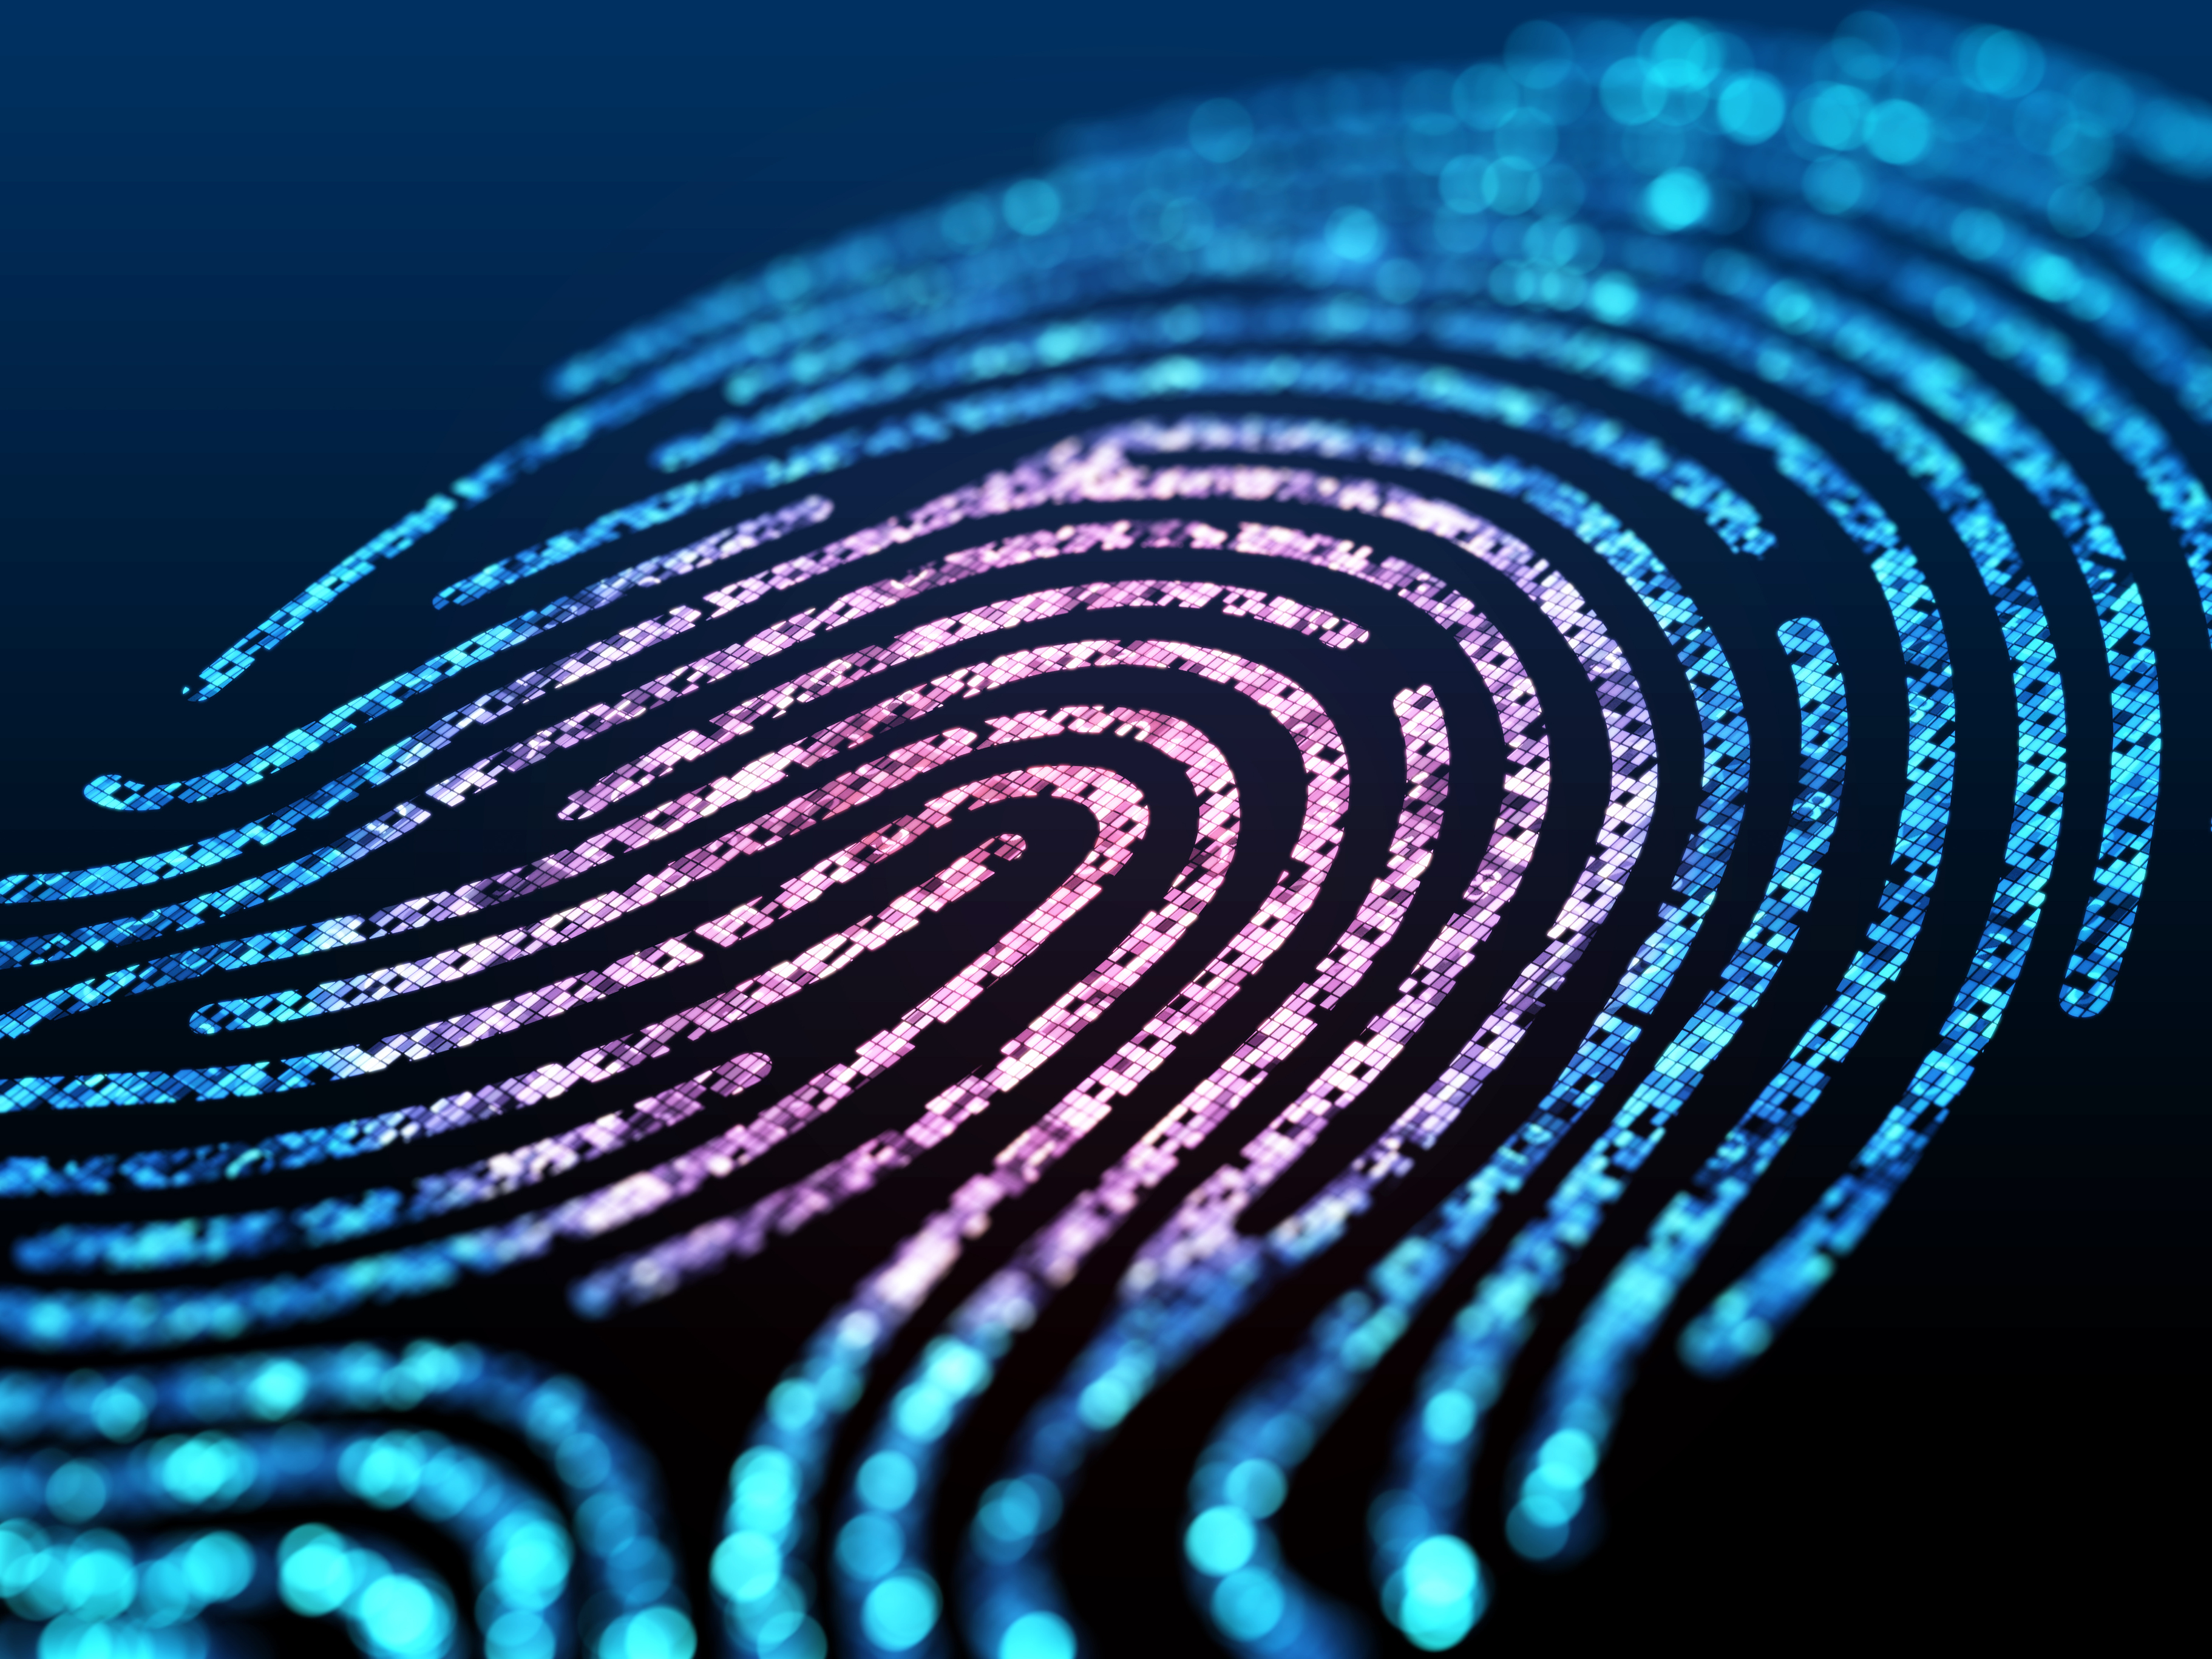 What You Should Know About the Canadian Biometrics Program